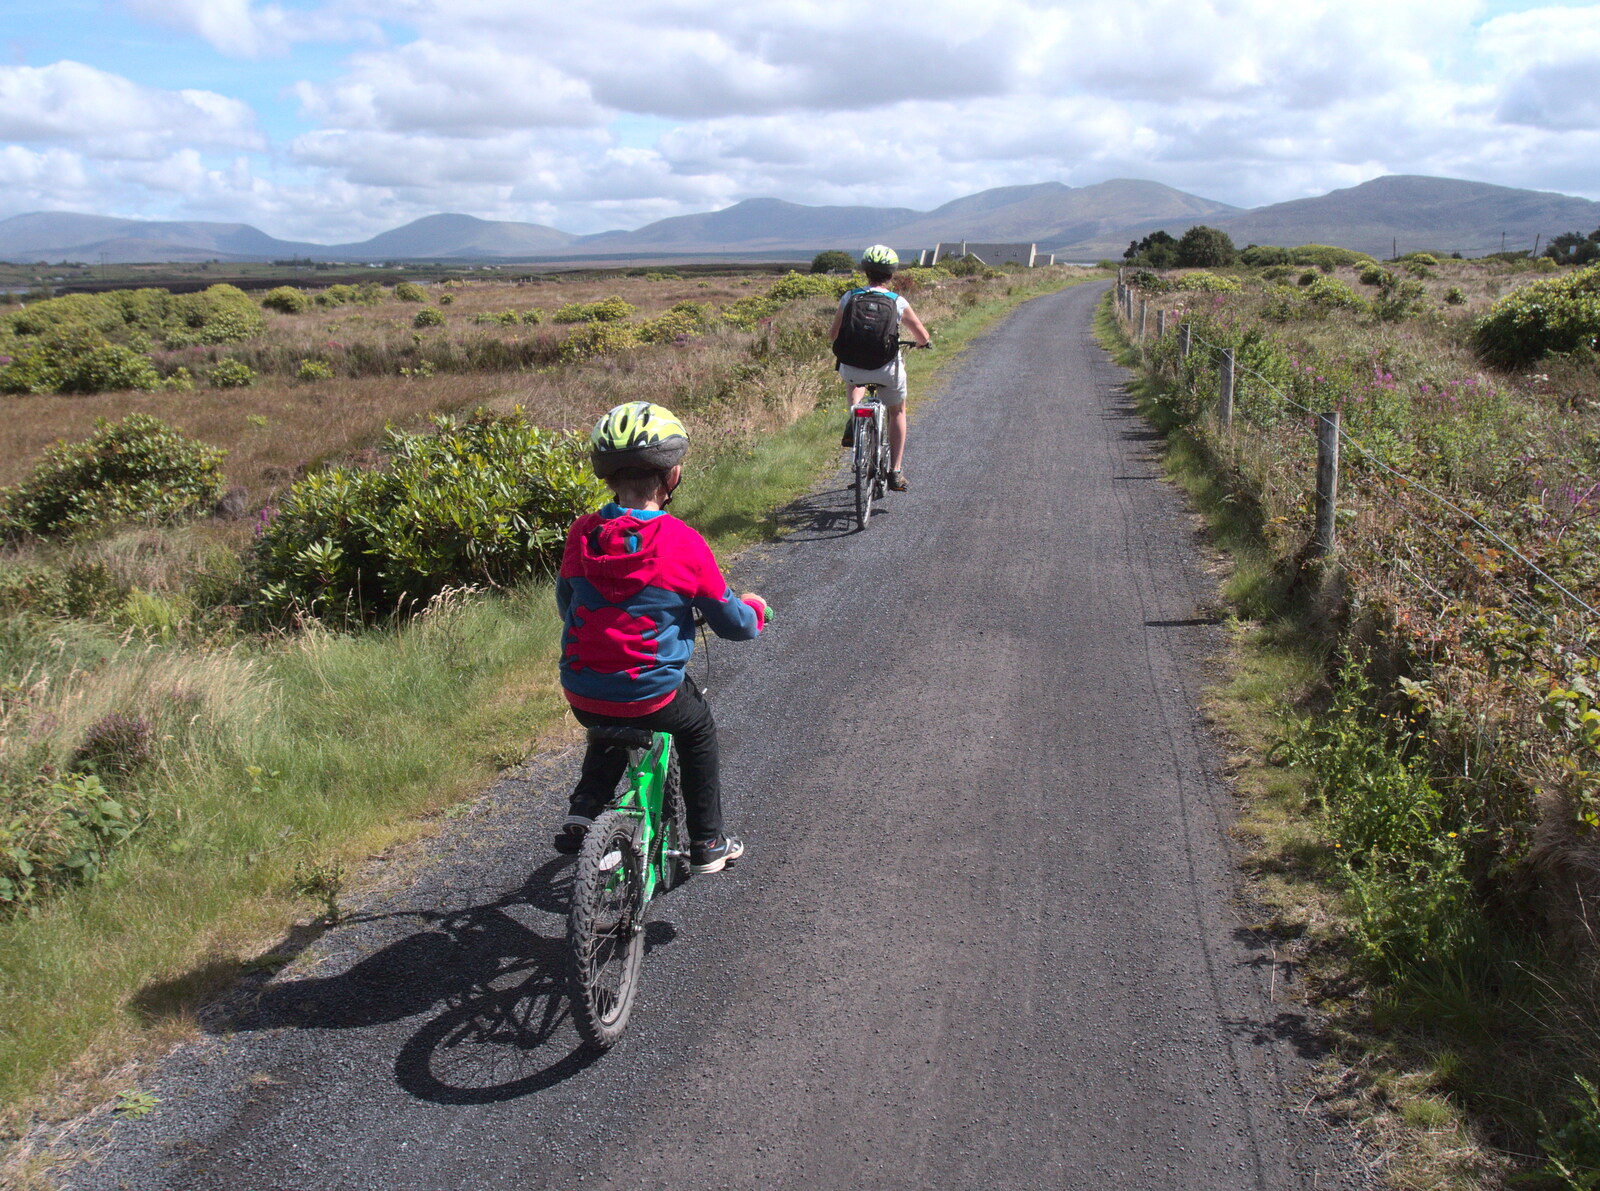 Fred and Isobel on the Greenway from A Bike Ride to Mulranny, County Mayo, Ireland - 9th August 2017